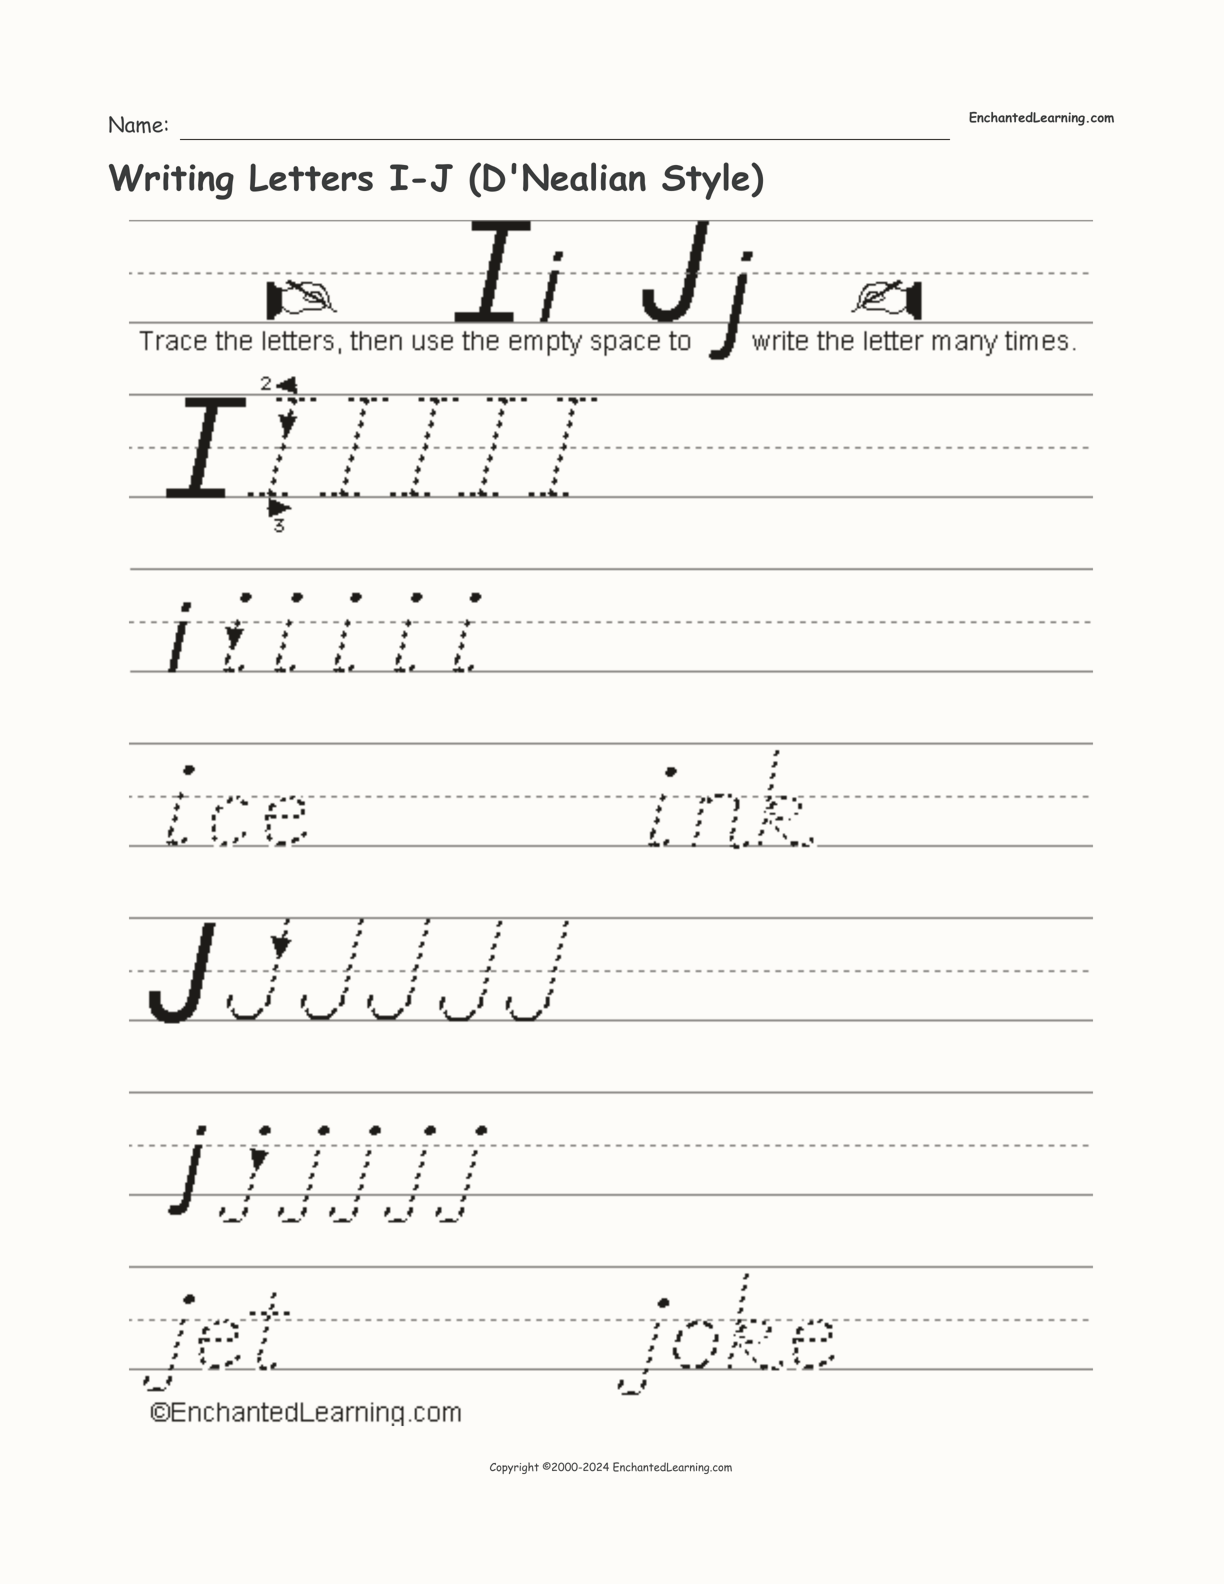 Writing Letters I-J (D'Nealian Style) interactive worksheet page 1